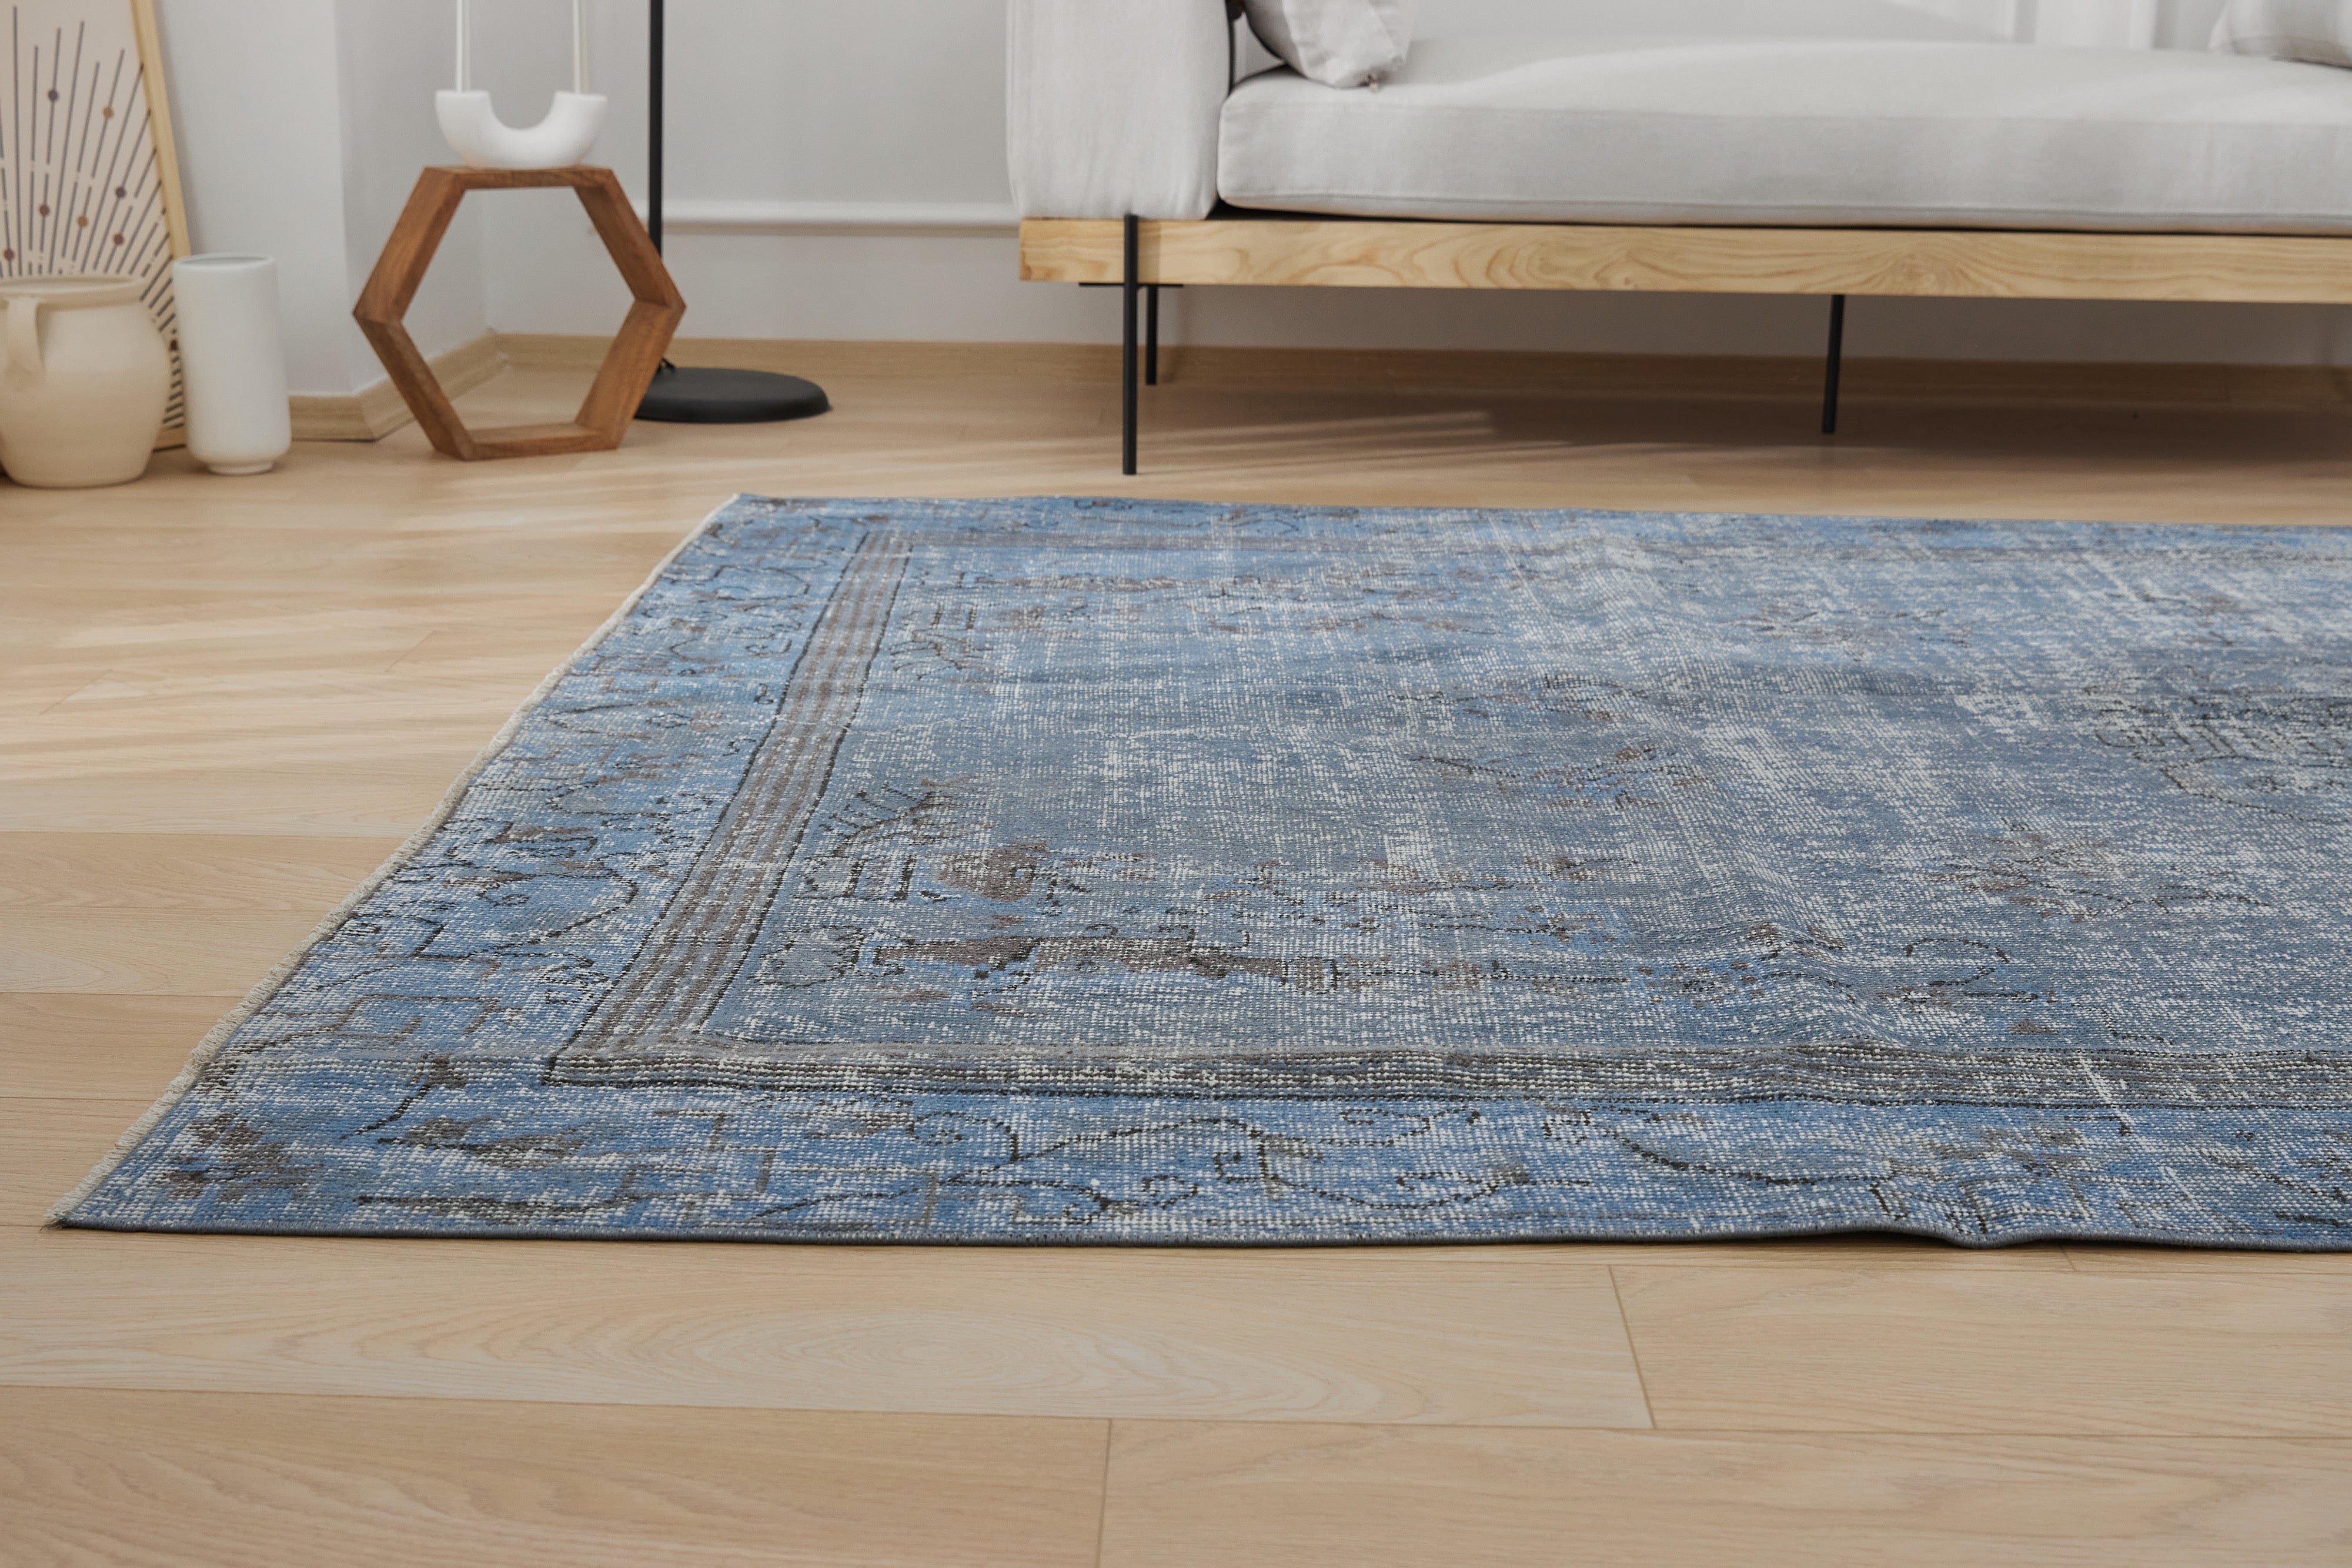 Hand-Knotted History - Emelie's Timeless Beauty | Kuden Rugs